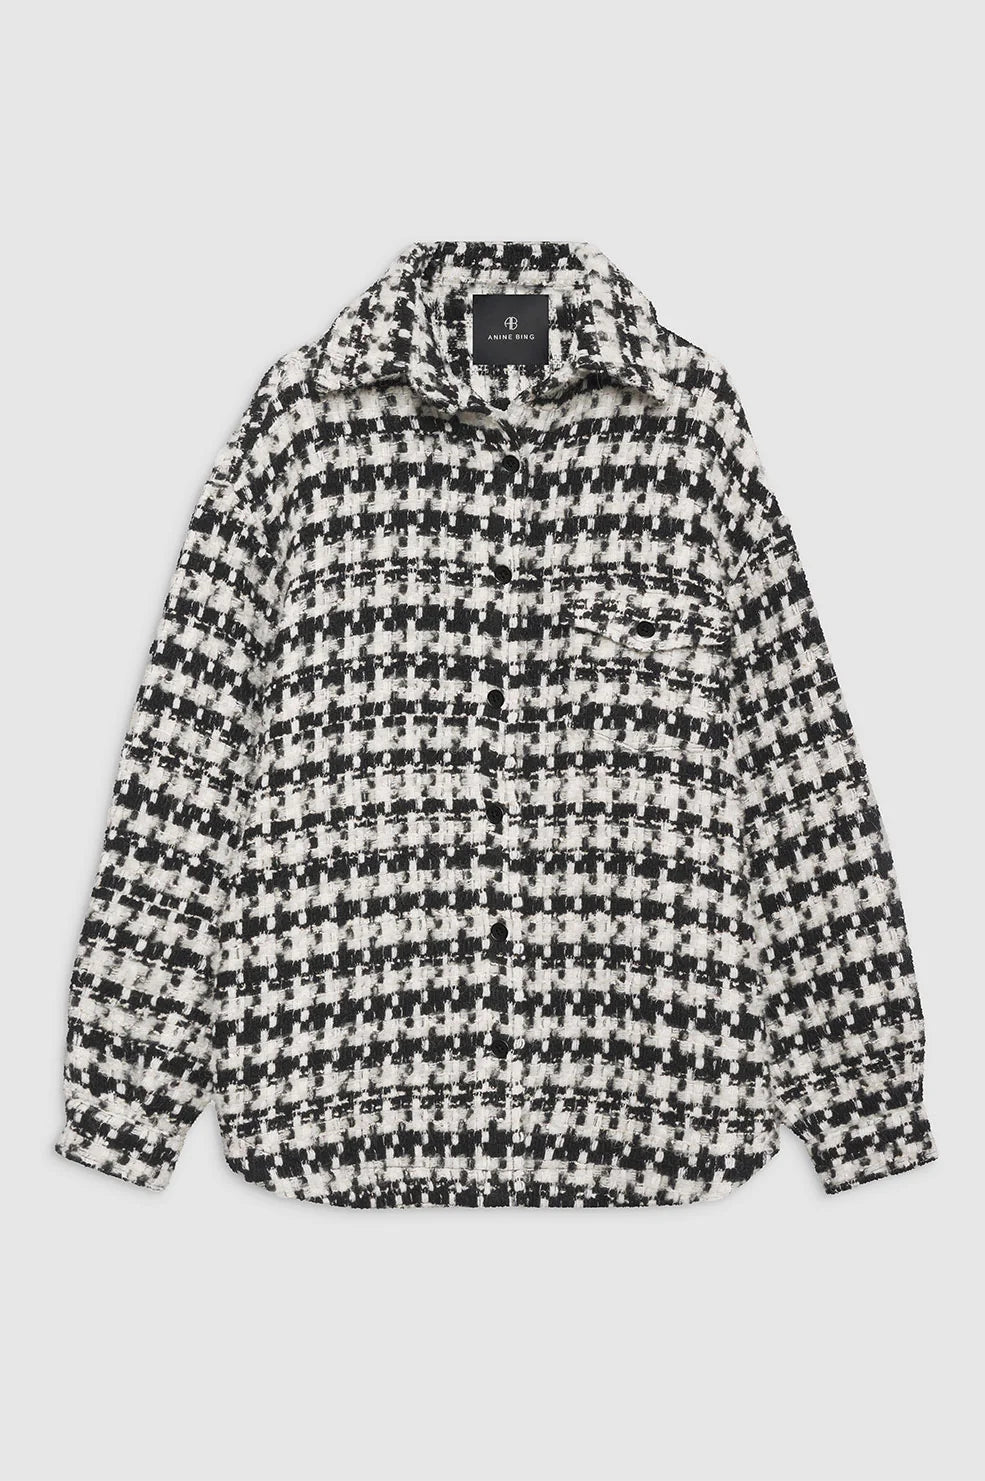 Sloan Jacket in Black and White